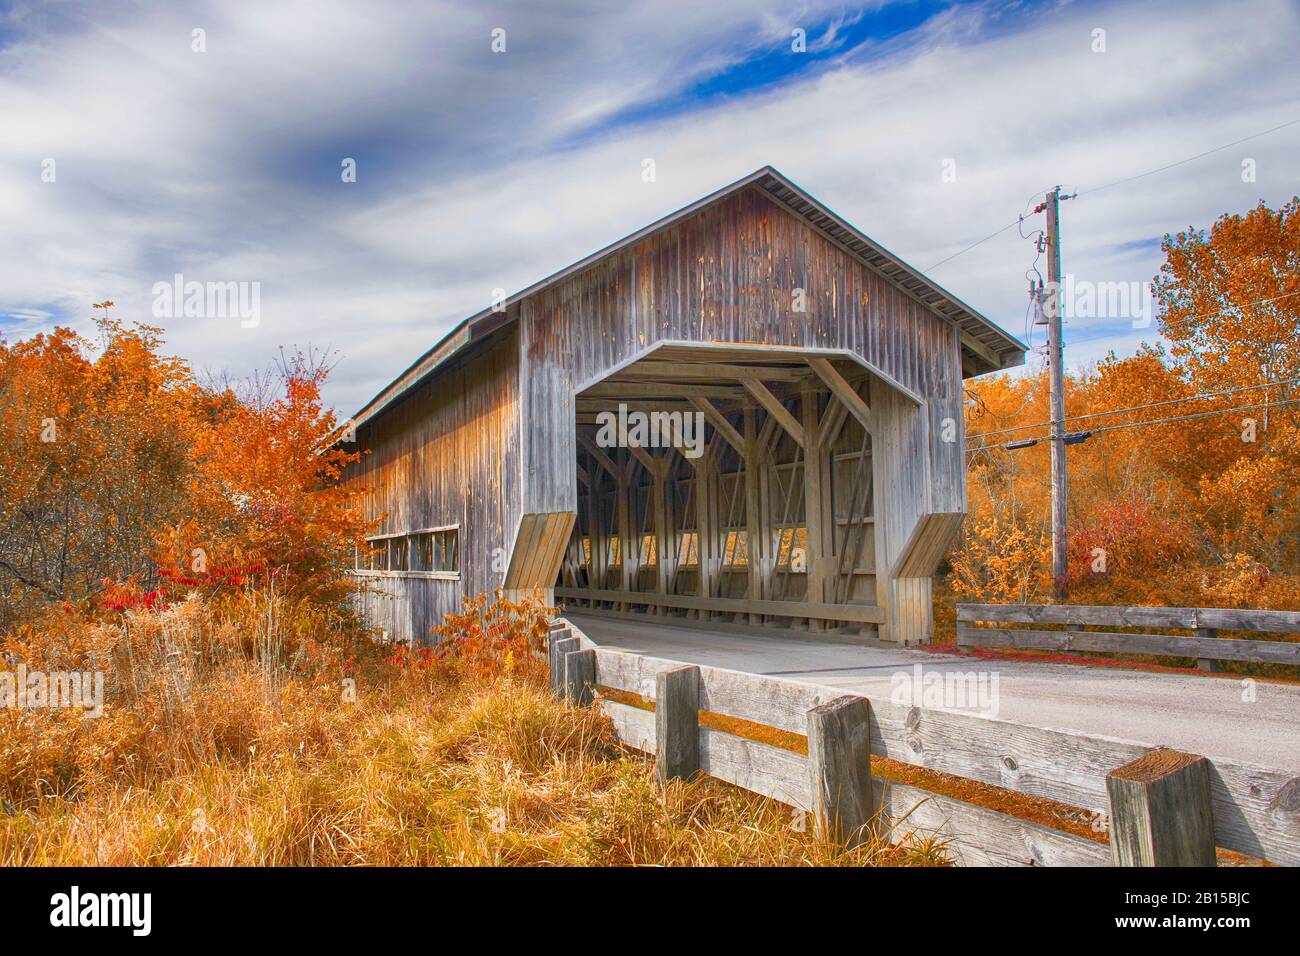 Fall Image of Caine Road Covered Bridge Stock Photo